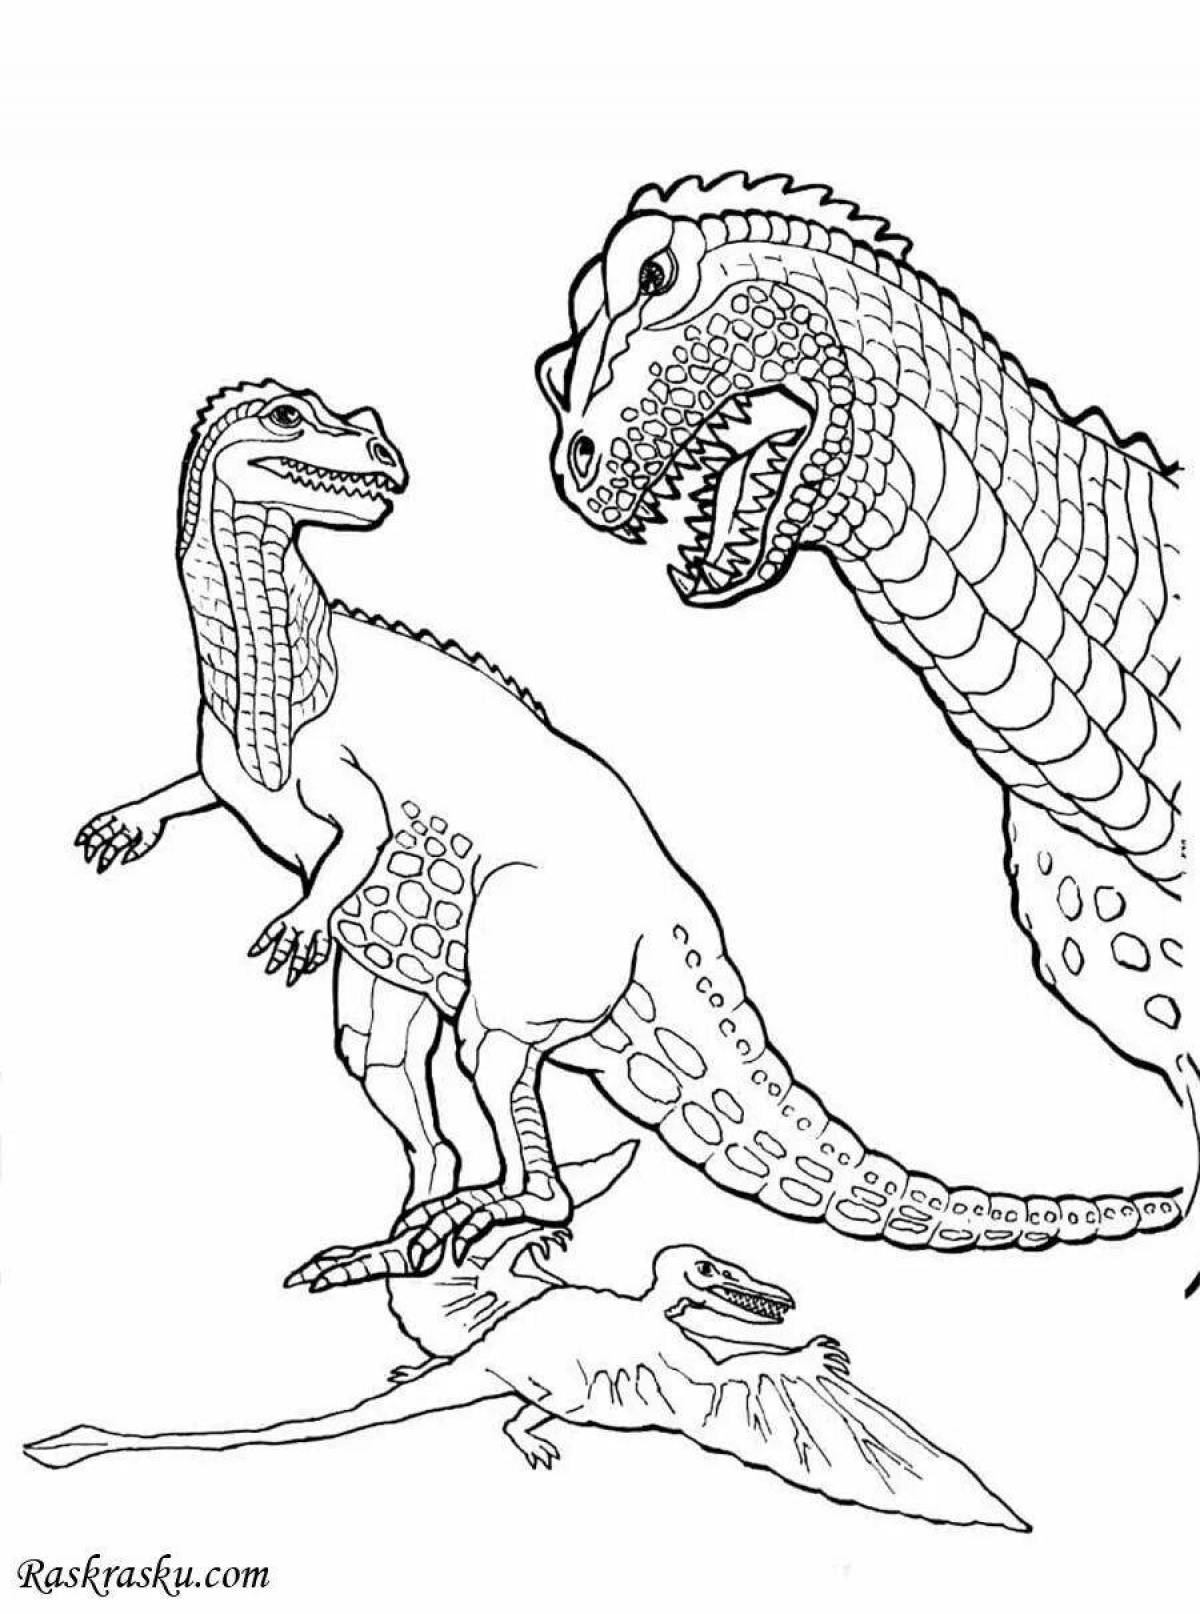 Coloring page magnificent ceratosaurus